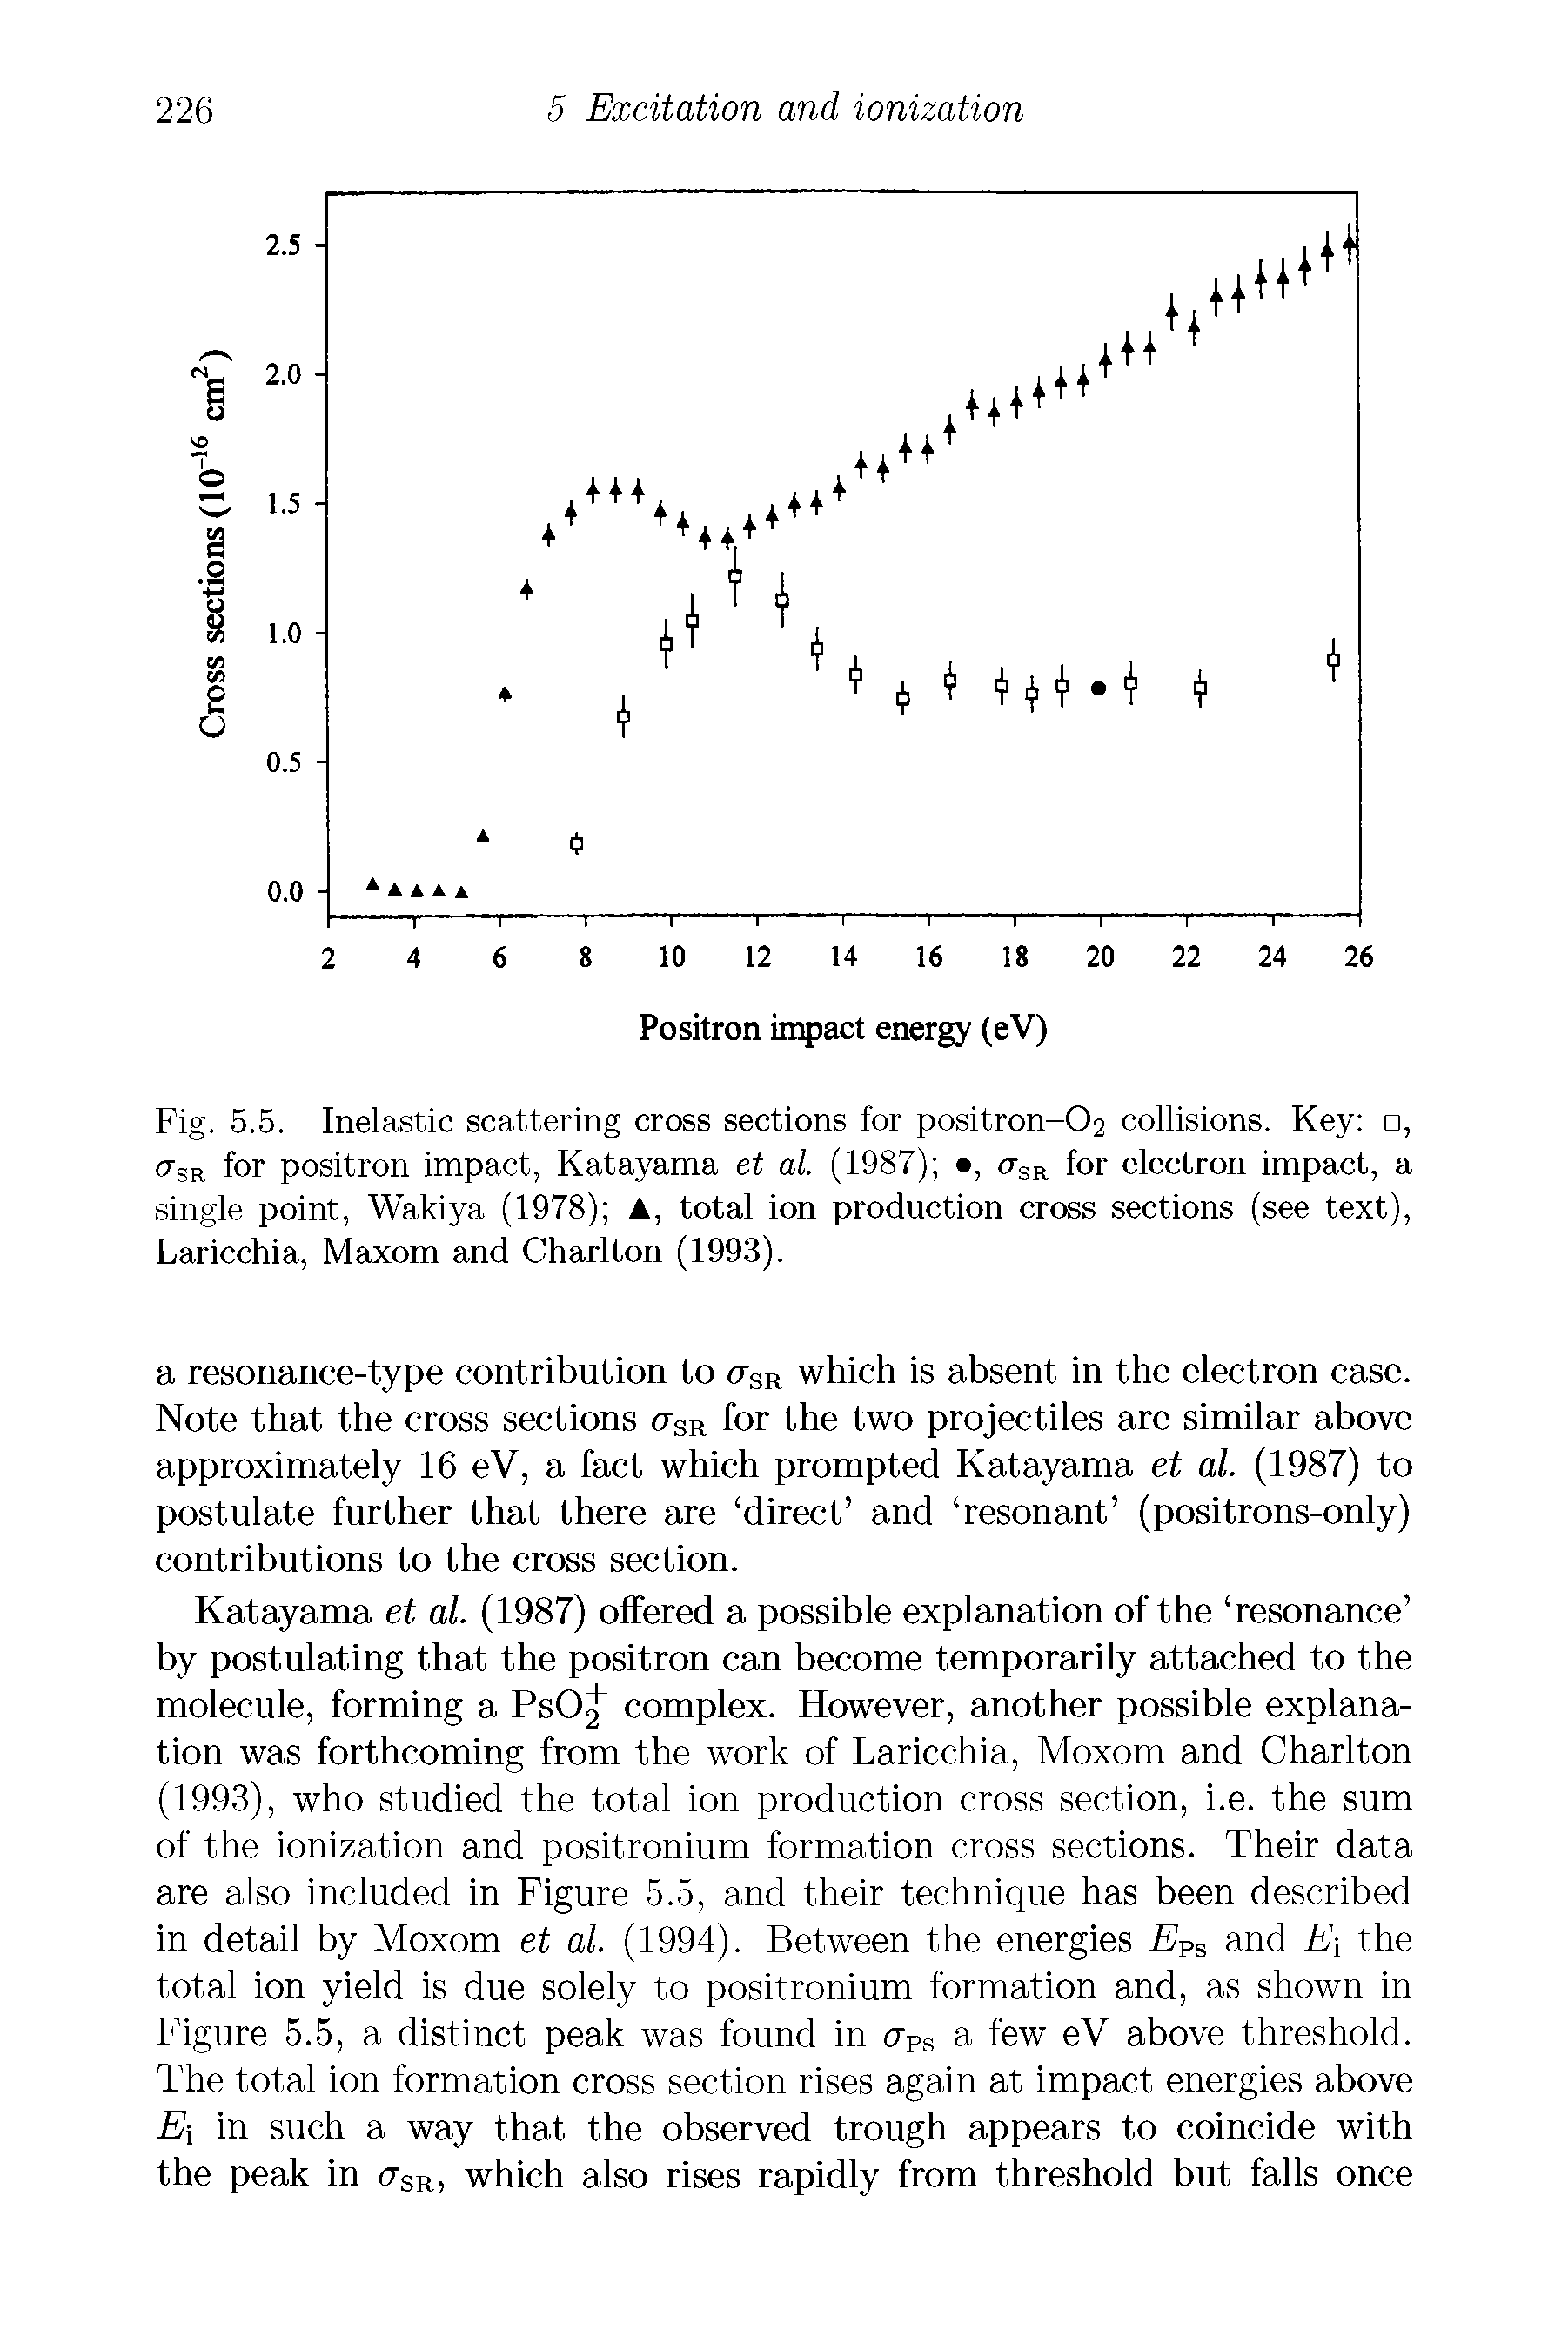 Fig. 5.5. Inelastic scattering cross sections for positron-02 collisions. Key , <tsr for positron impact, Katayama et al. (1987) , <rSR for electron impact, a single point, Wakiya (1978) A, total ion production cross sections (see text), Laricchia, Maxom and Charlton (1993).